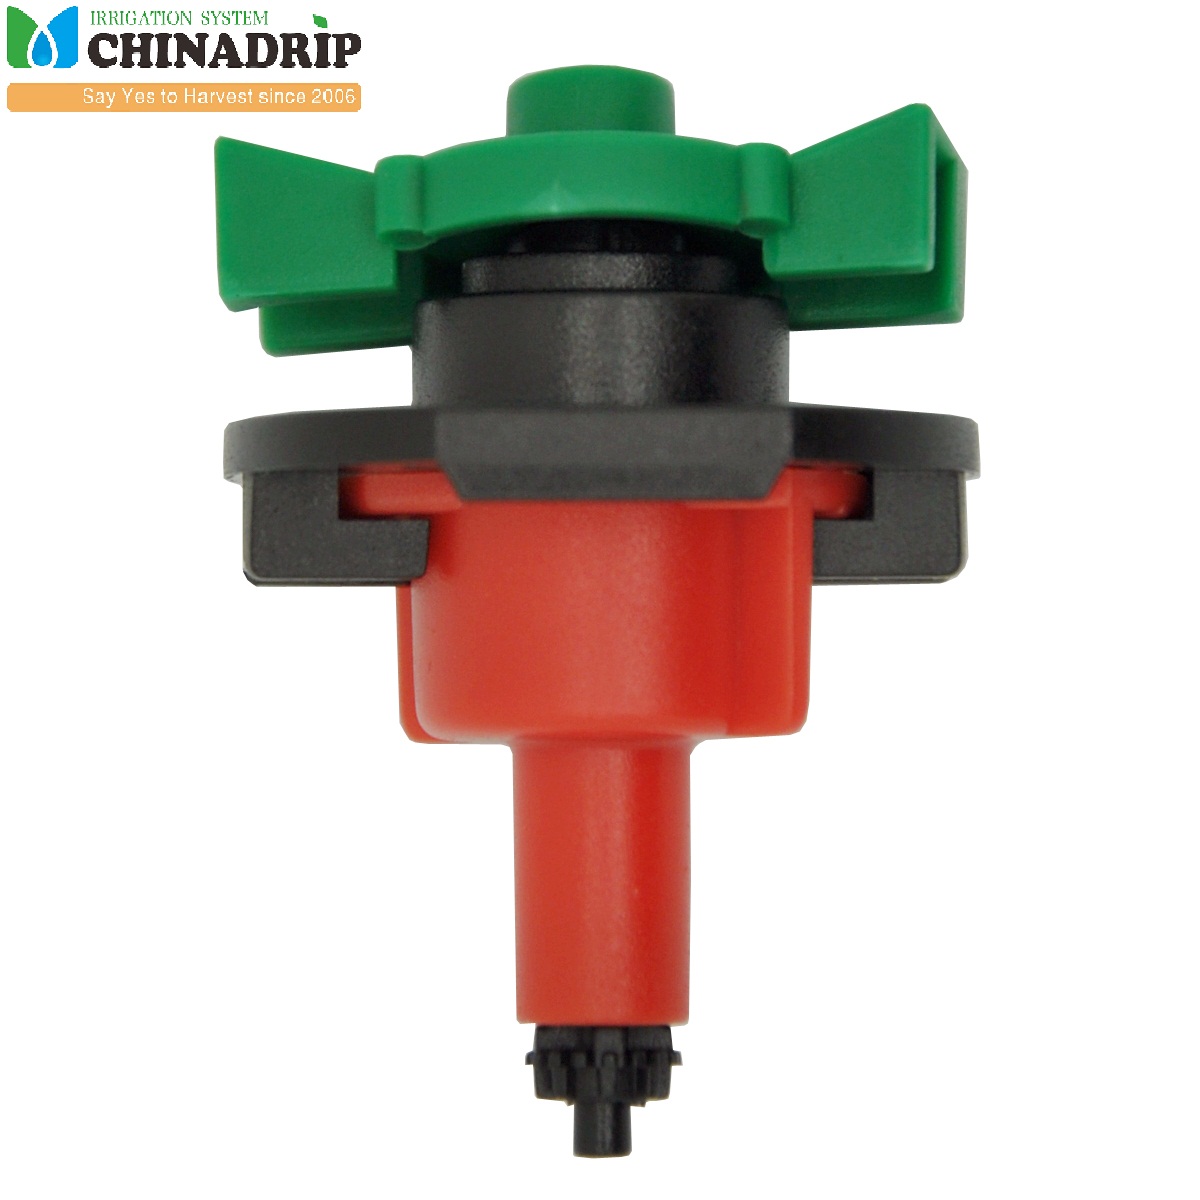 New products. 360º No Bridge Mini Sprinklers (Up-right Type) 